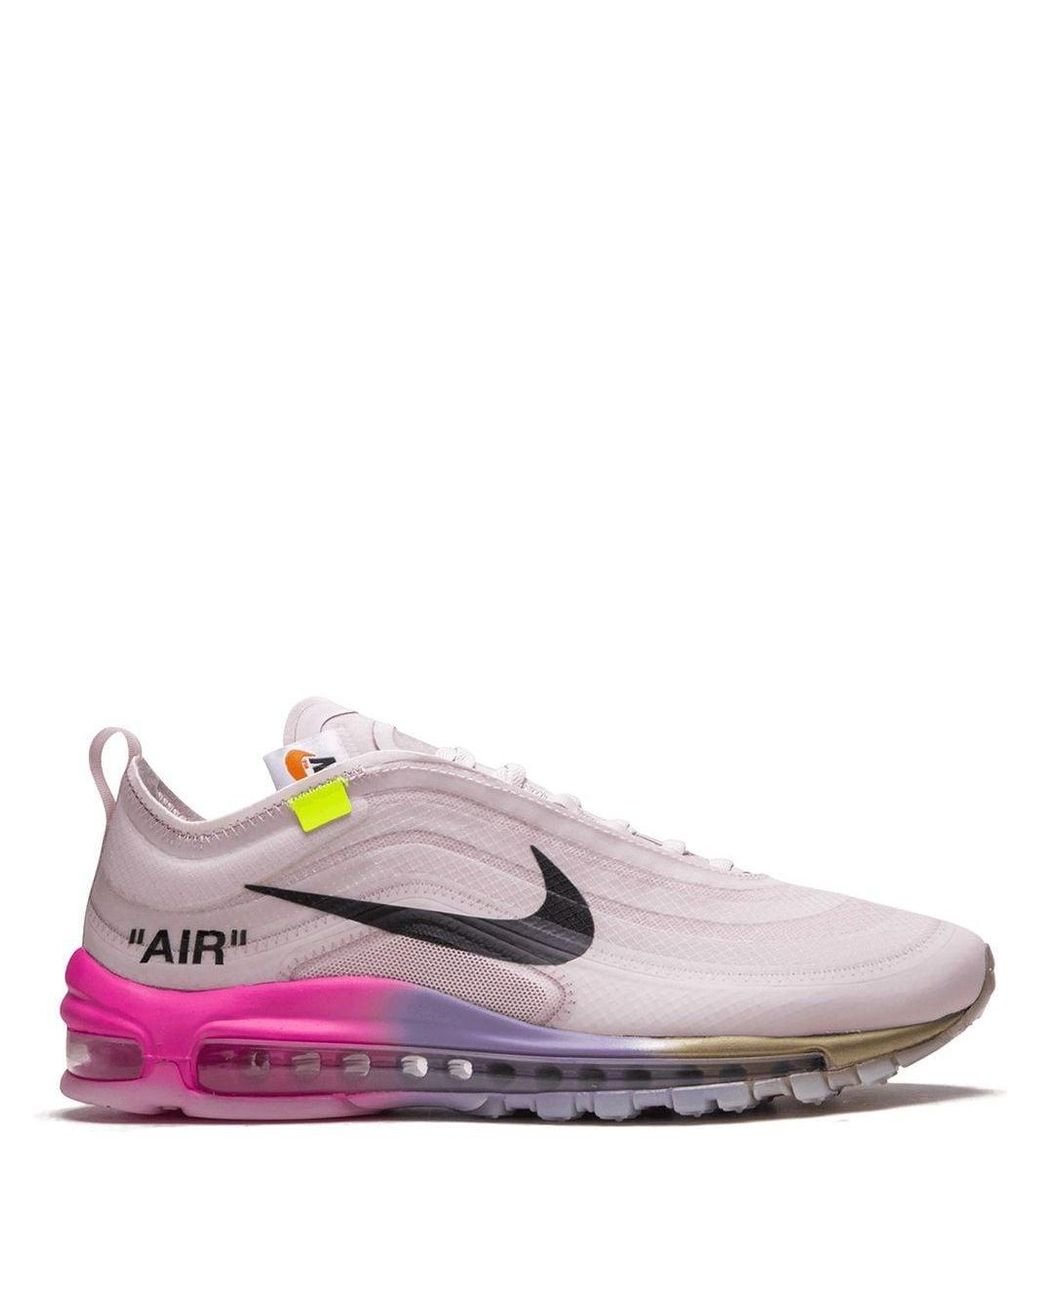 NIKE X OFF-WHITE Rubber The 10th: Air Max 97 Og Sneakers in Pink for Men -  Lyst